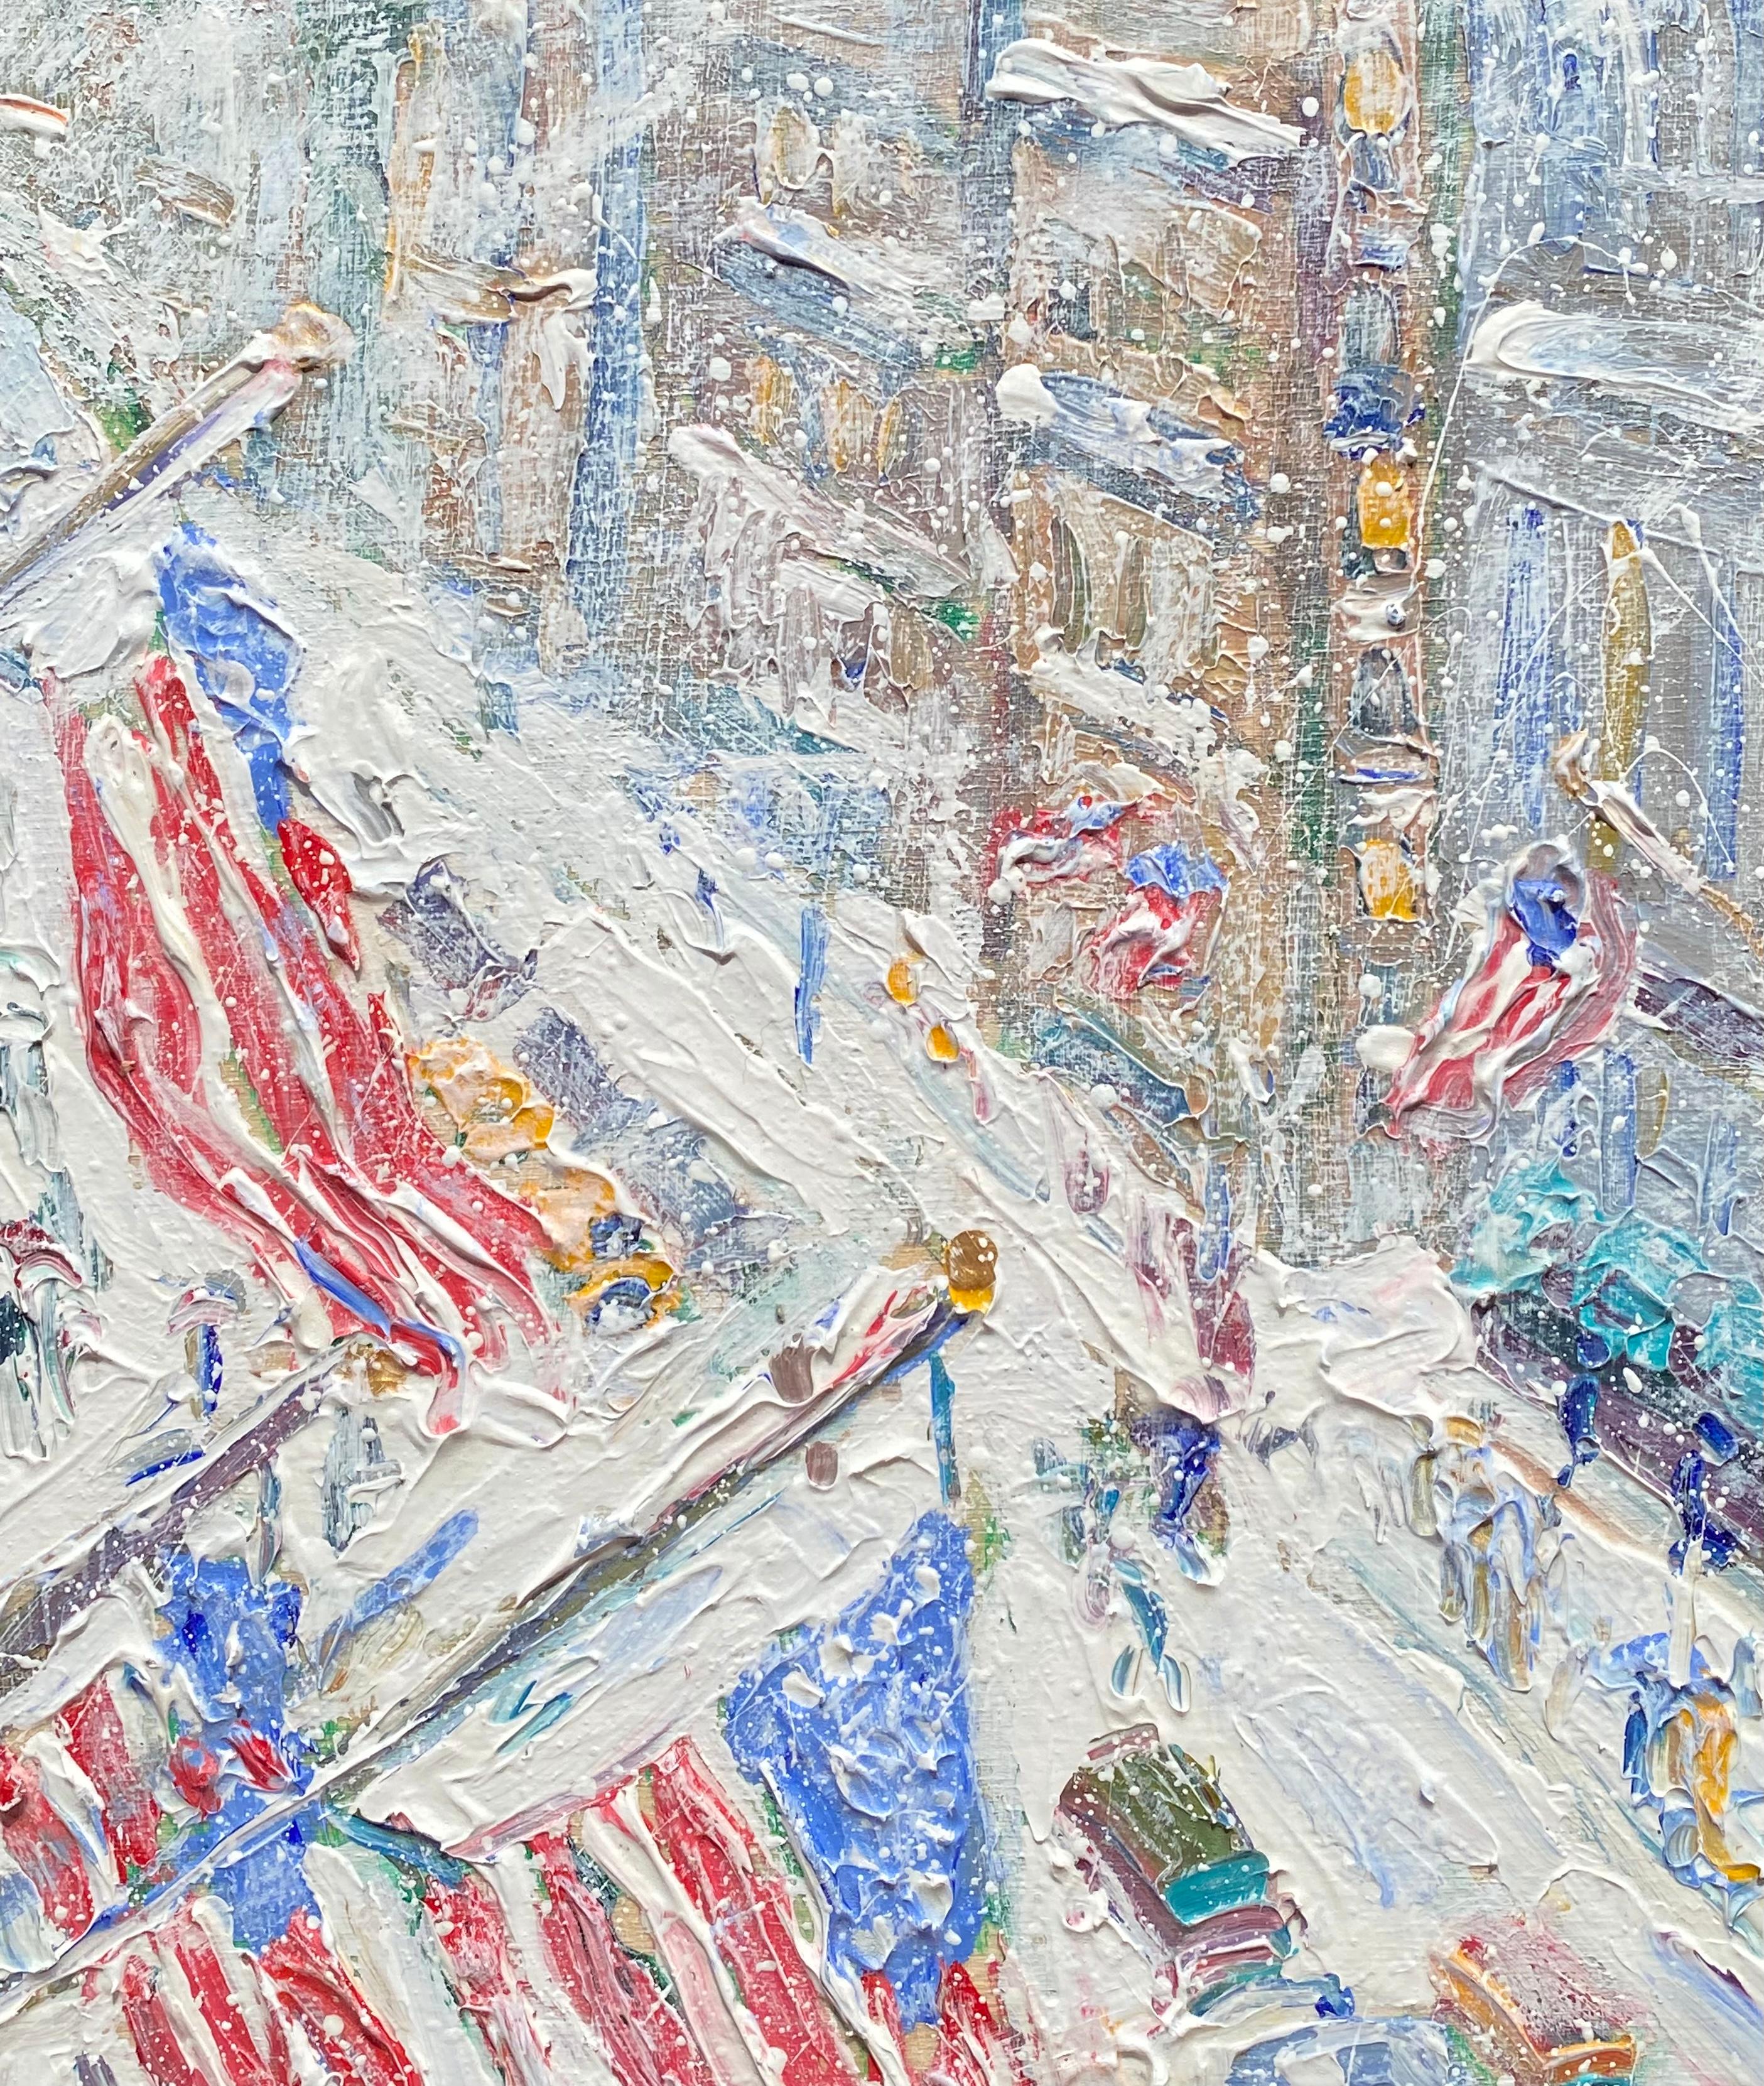 “Snowy Eve, 5th Avenue” - Painting by John Crimmins